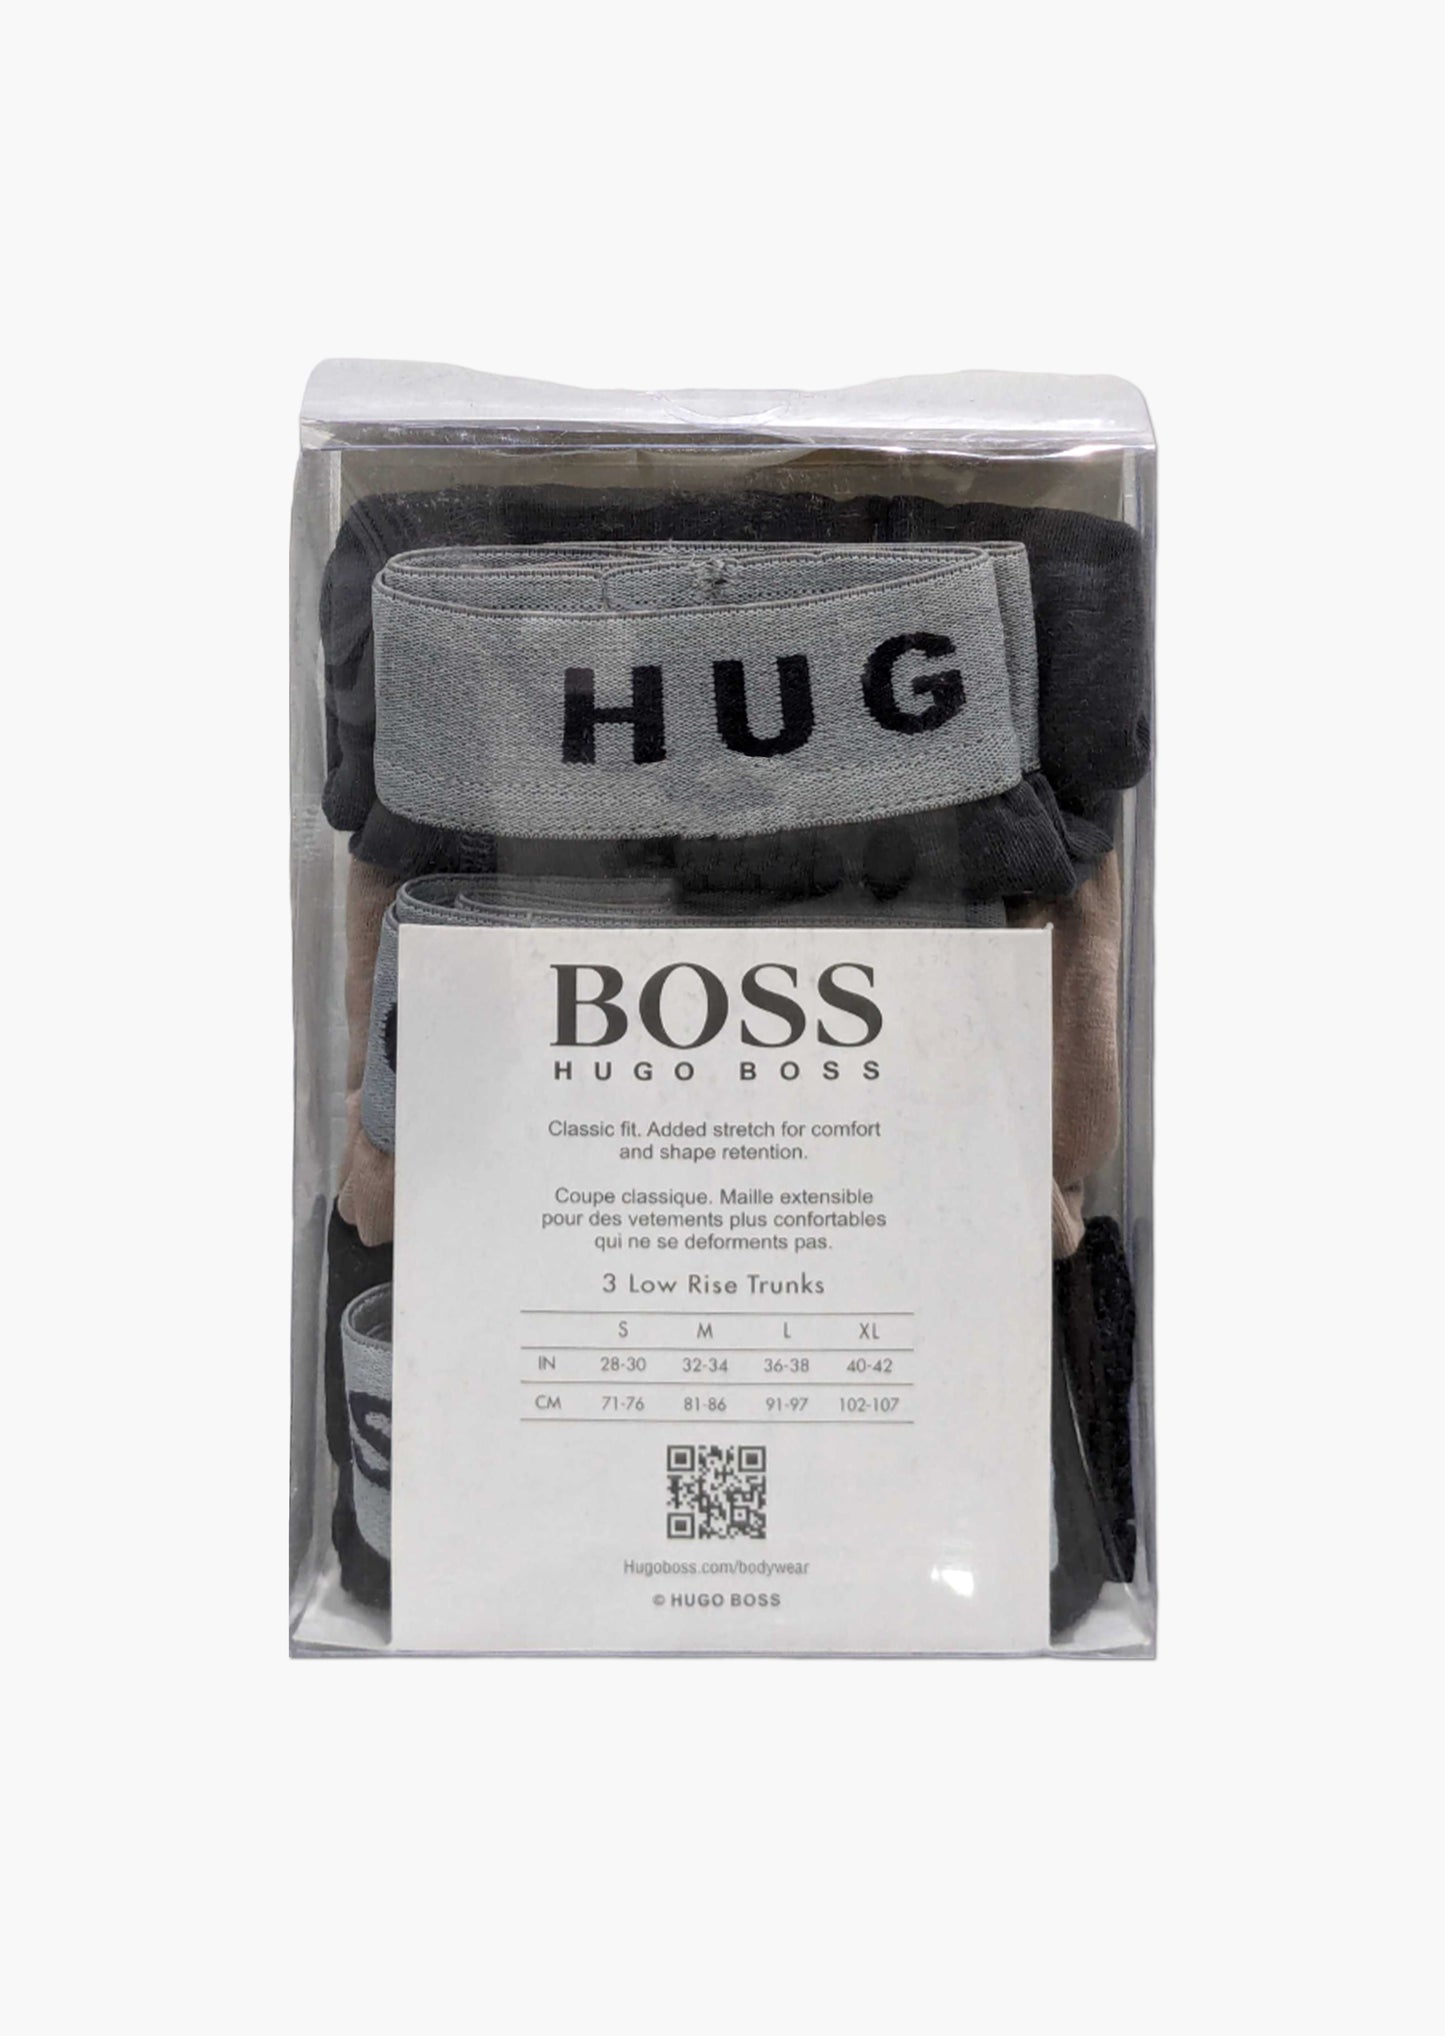 B-O-S-S Boxers (Pack of 3)